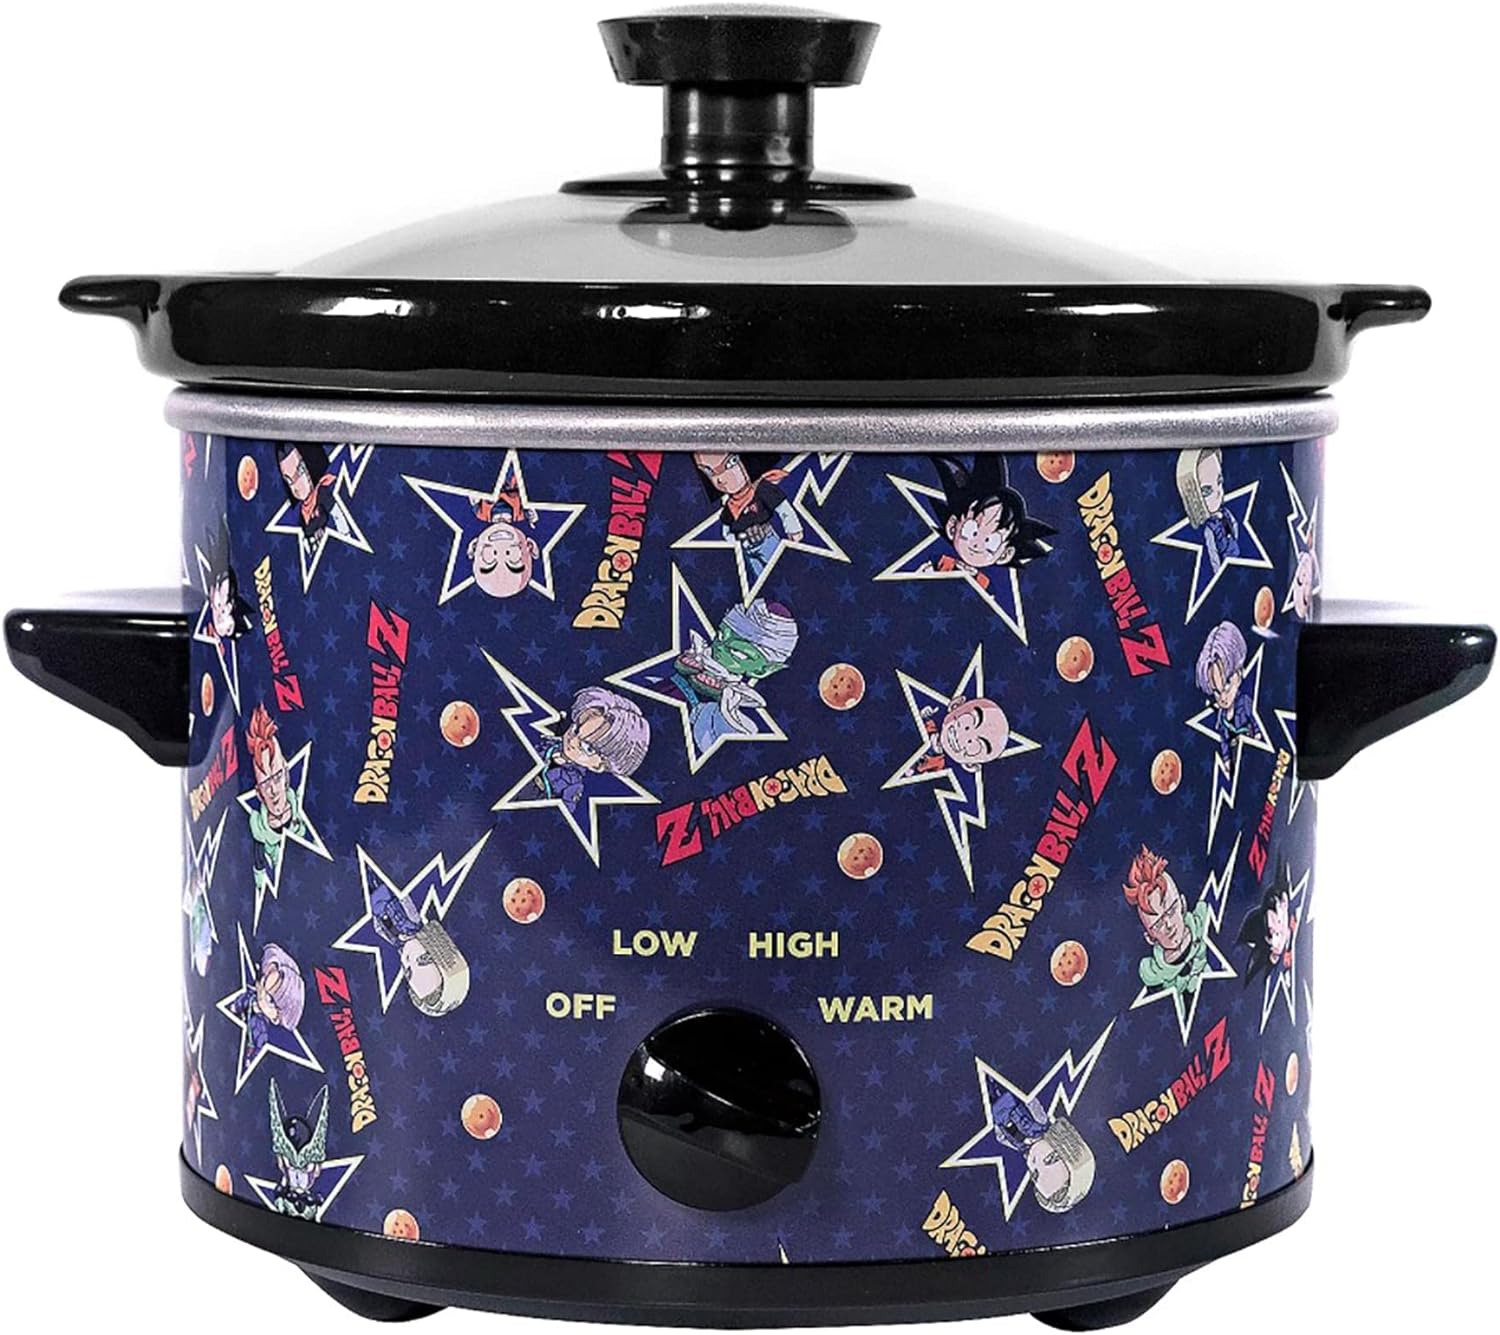 Uncanny Brands Dragon Ball Z 2qt Slow Cooker- Cook Anime Style- Small Kitchen Appliance